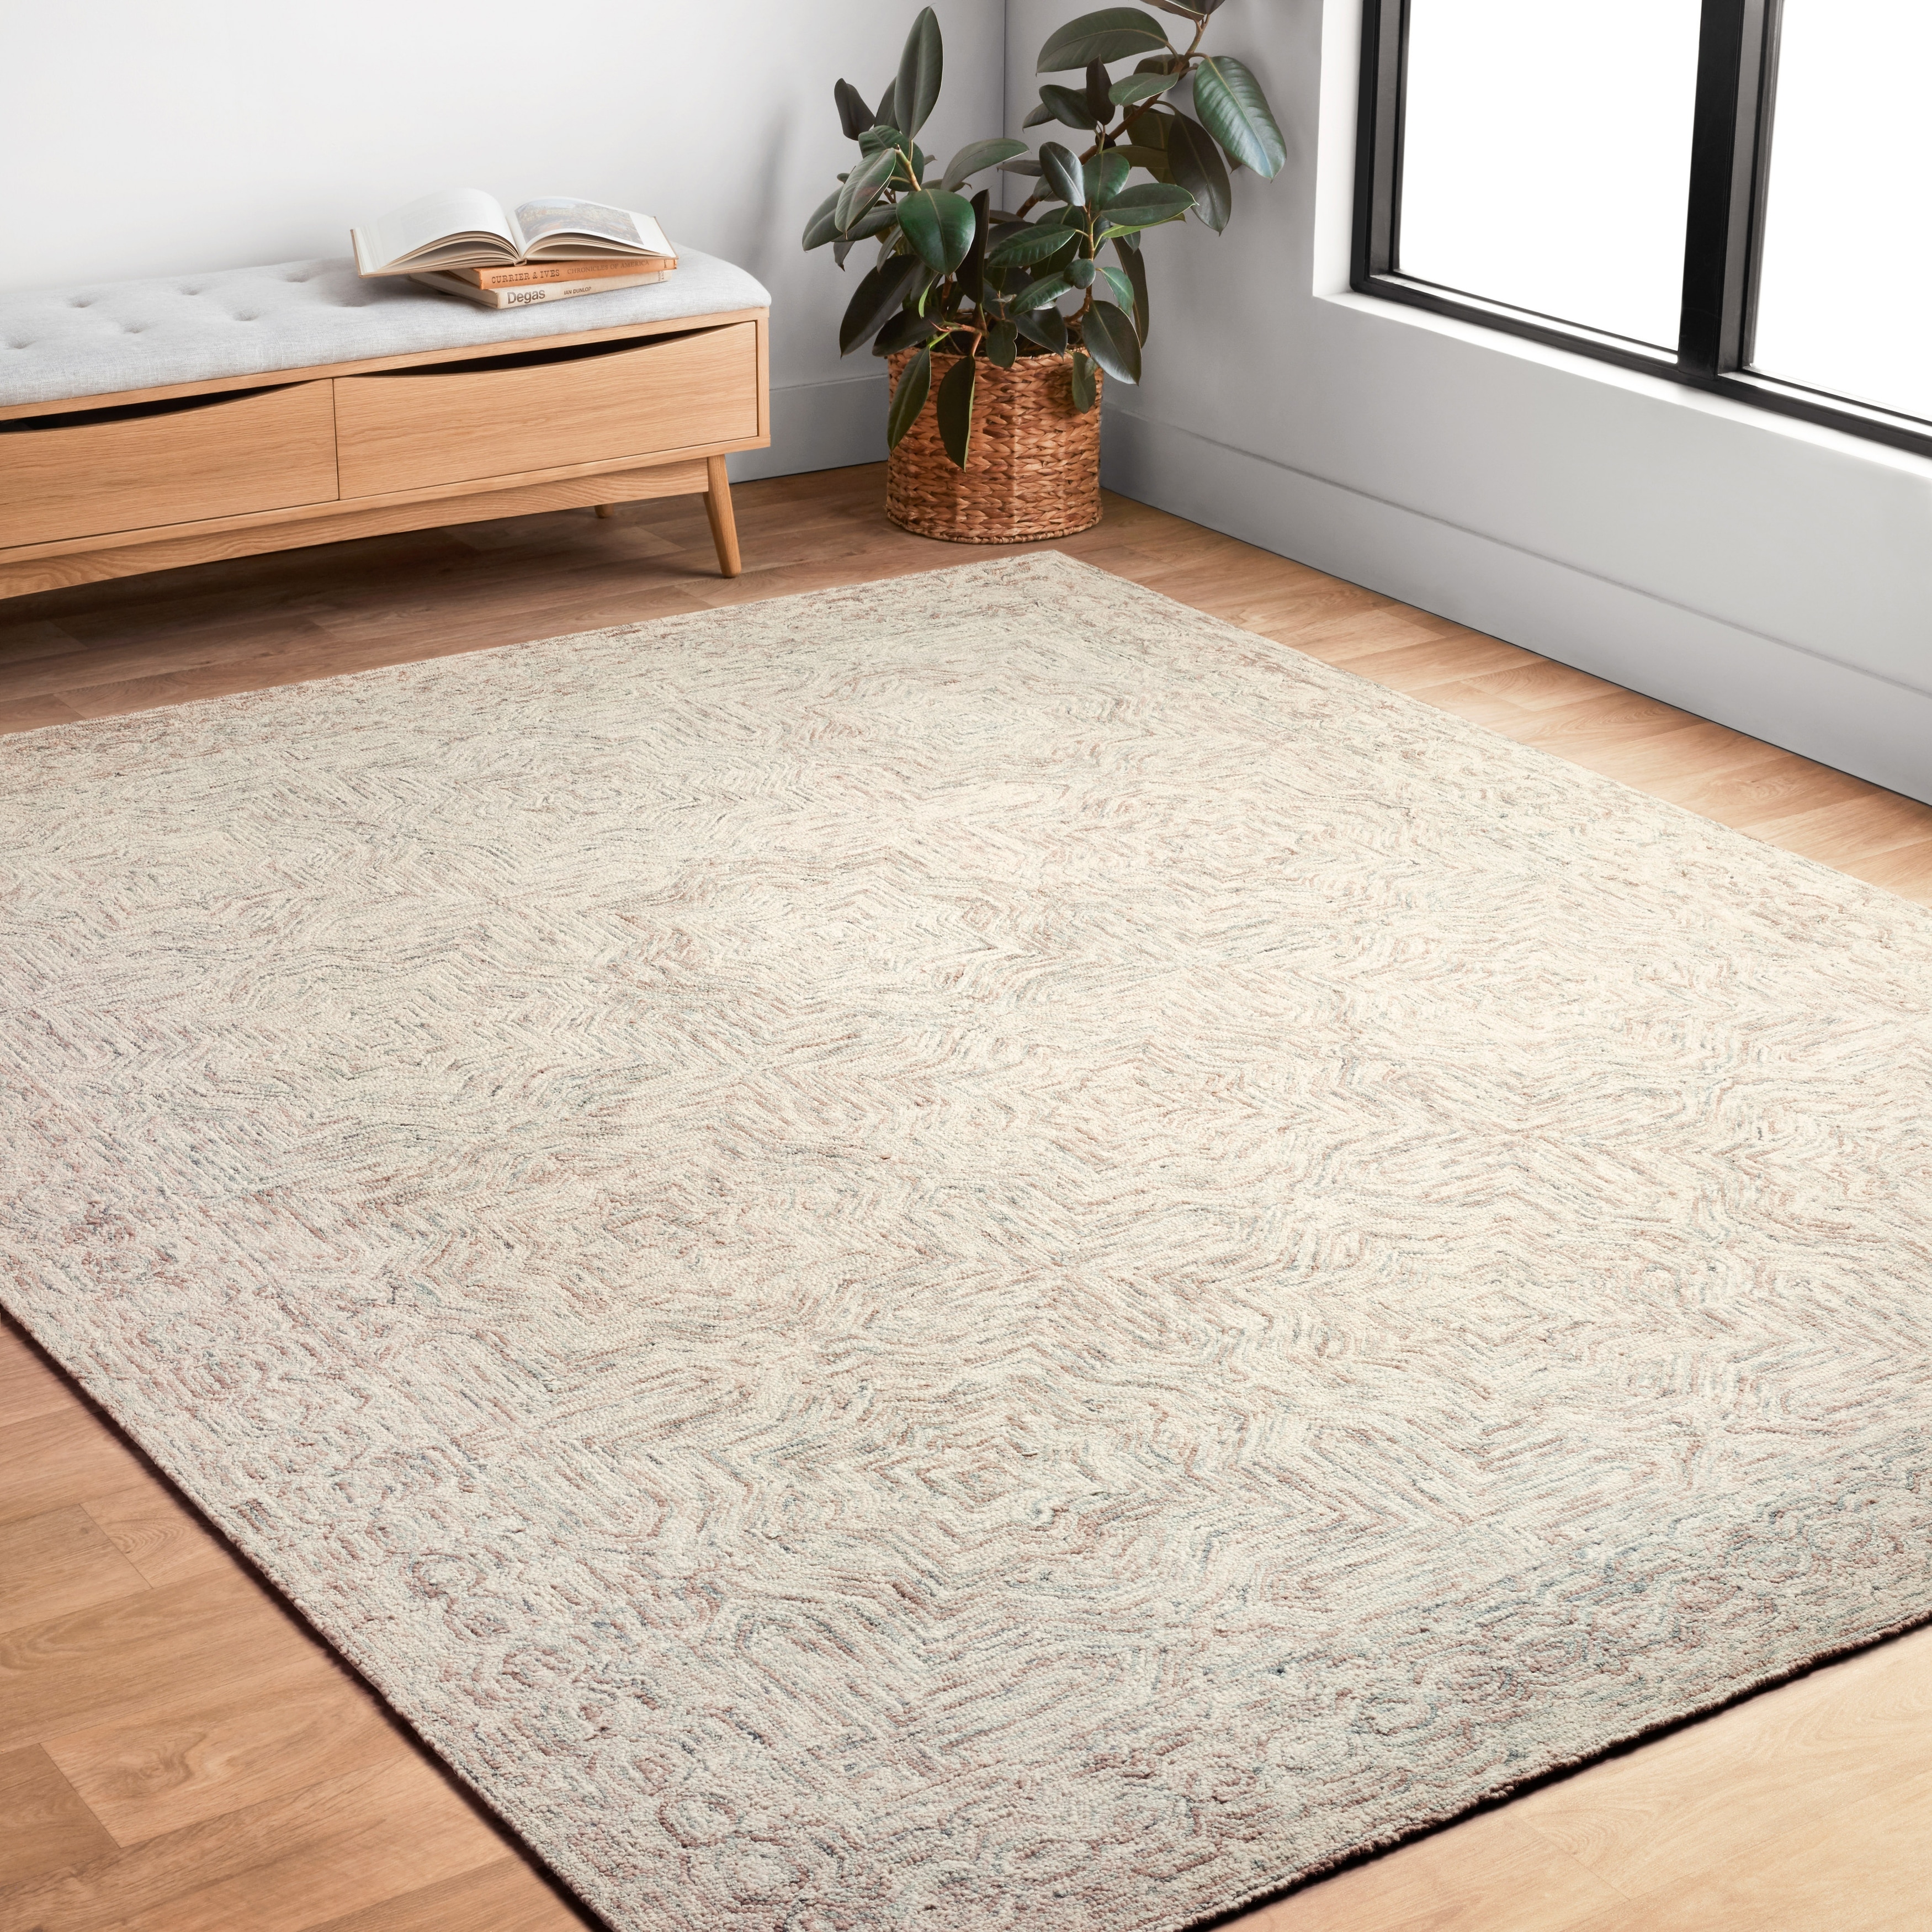 Tufted Stitch Rug  Hand tufted rugs, Tufted rug, Tufted